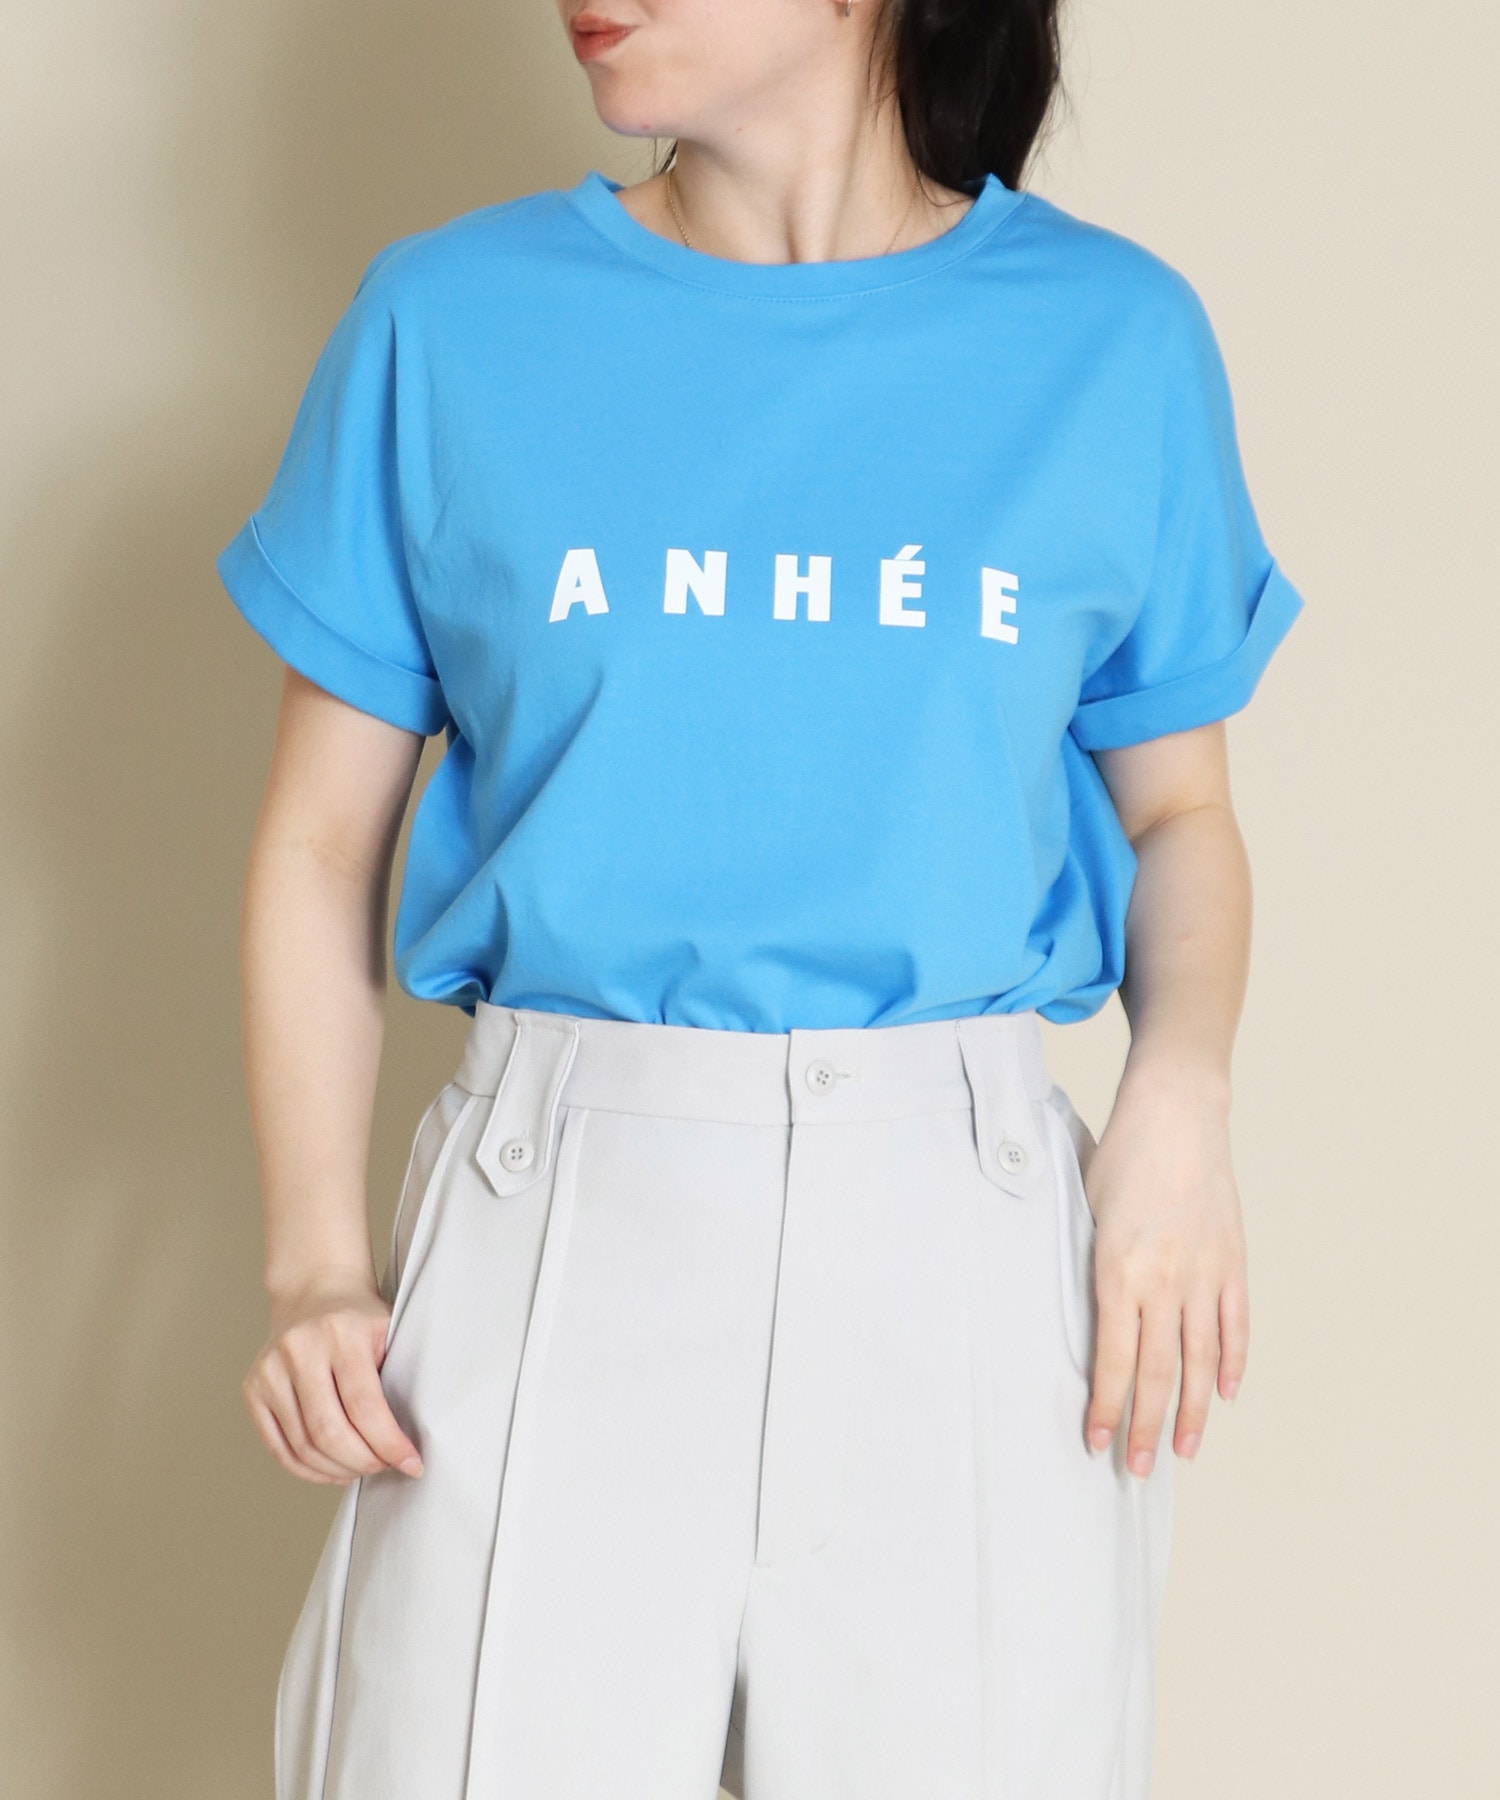 ANHEEロゴTシャツ